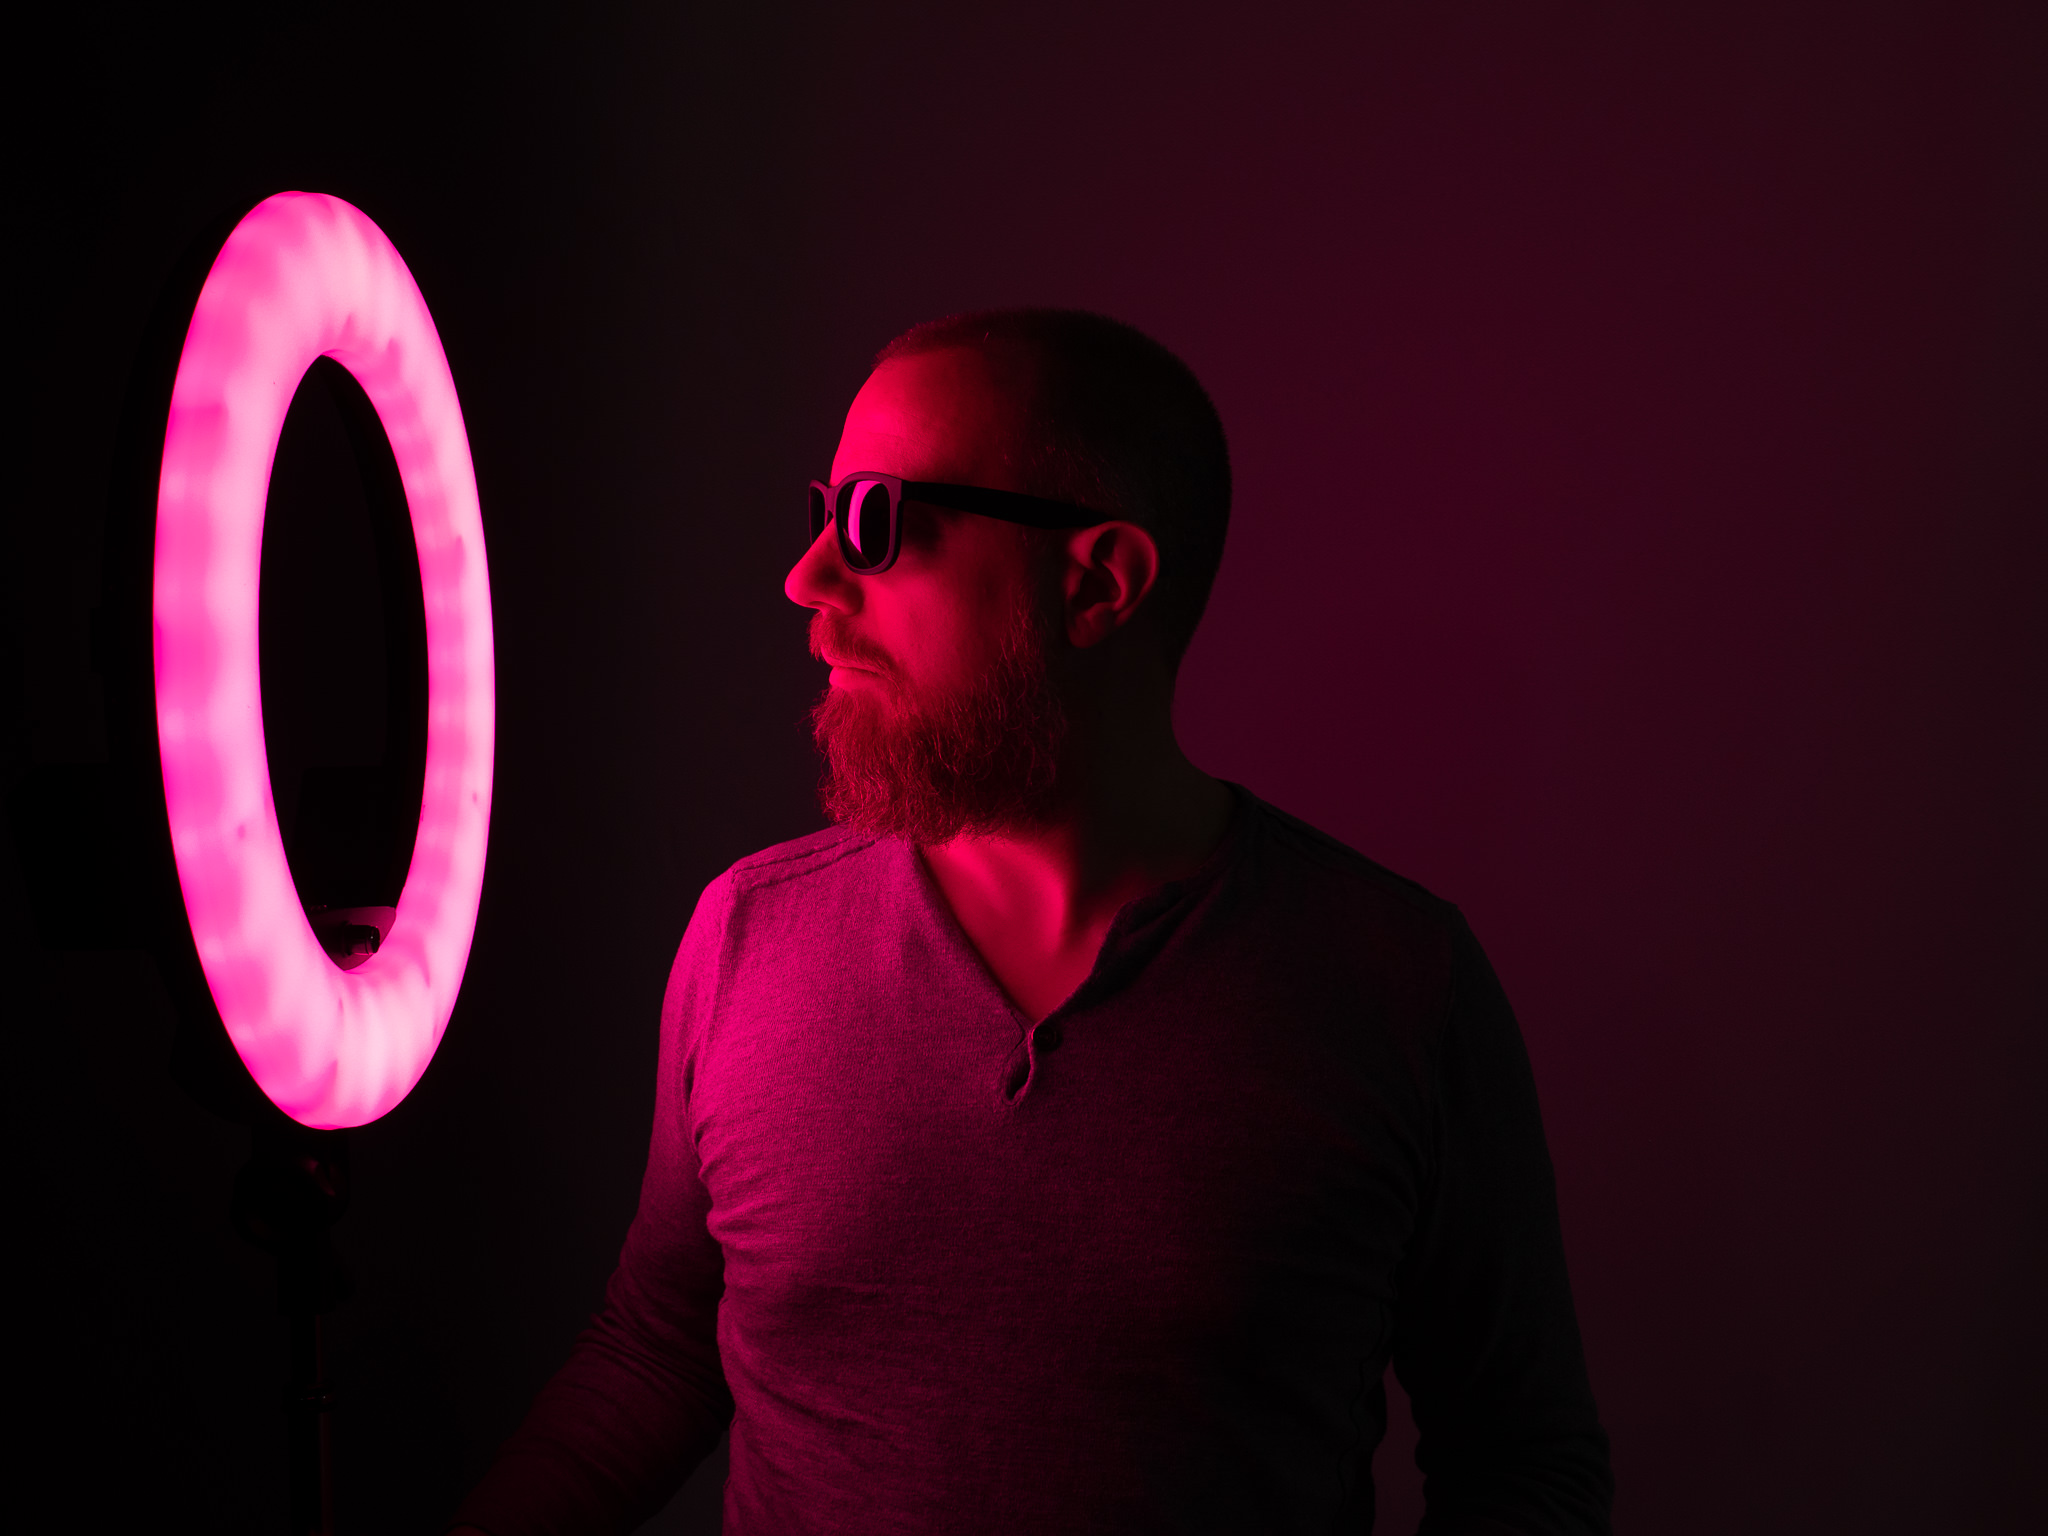 Photo taken with Prismatic Spectra RGB Rainbow LED Ring Light in red / magenta colors